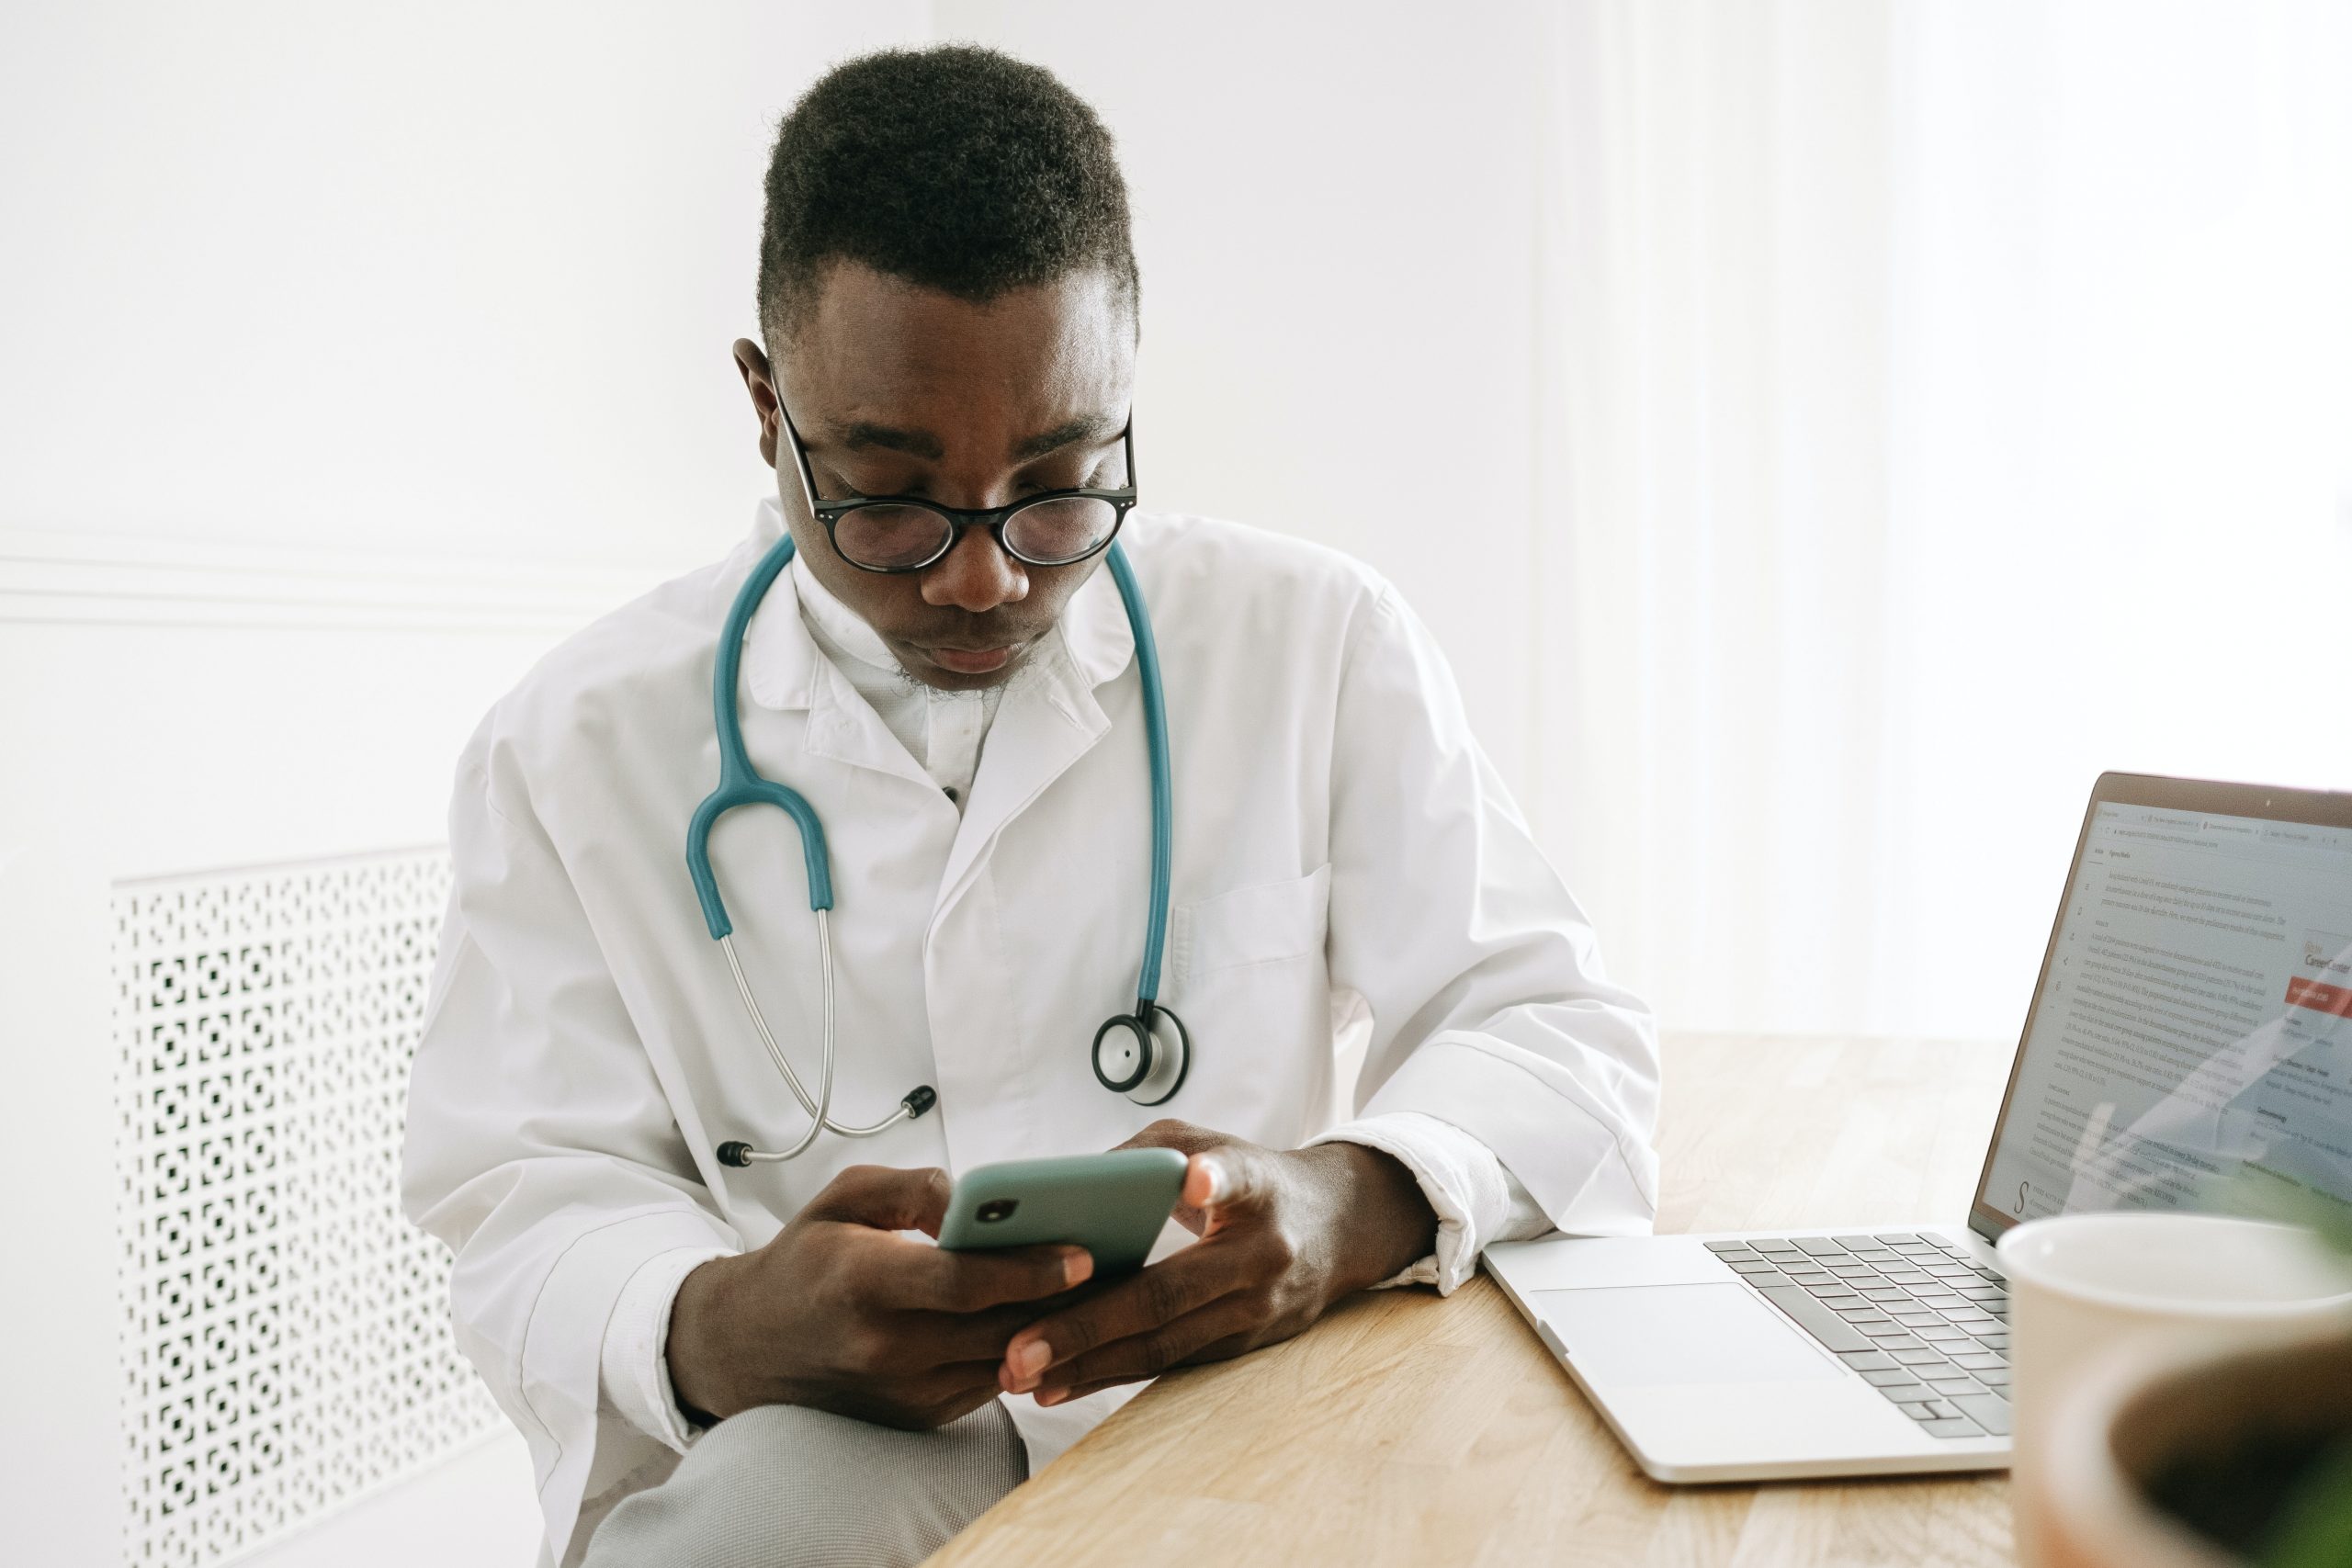 African American male doctor with serious expression on cell phone sitting at desk with computer